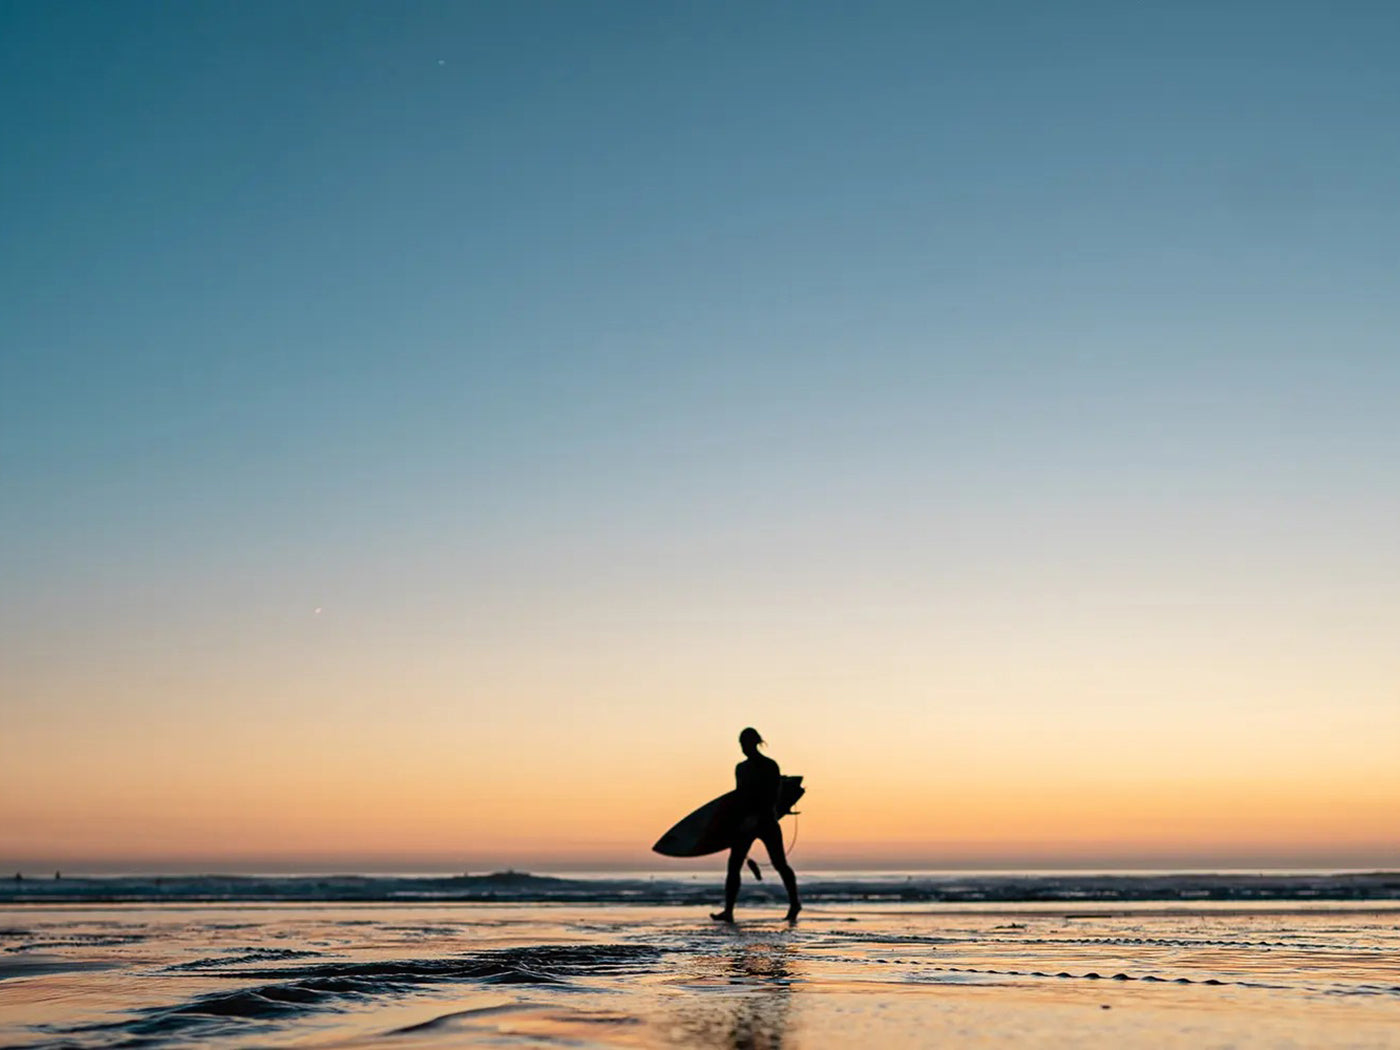 Person in the distance holding a surfboard on the beach at sunrise